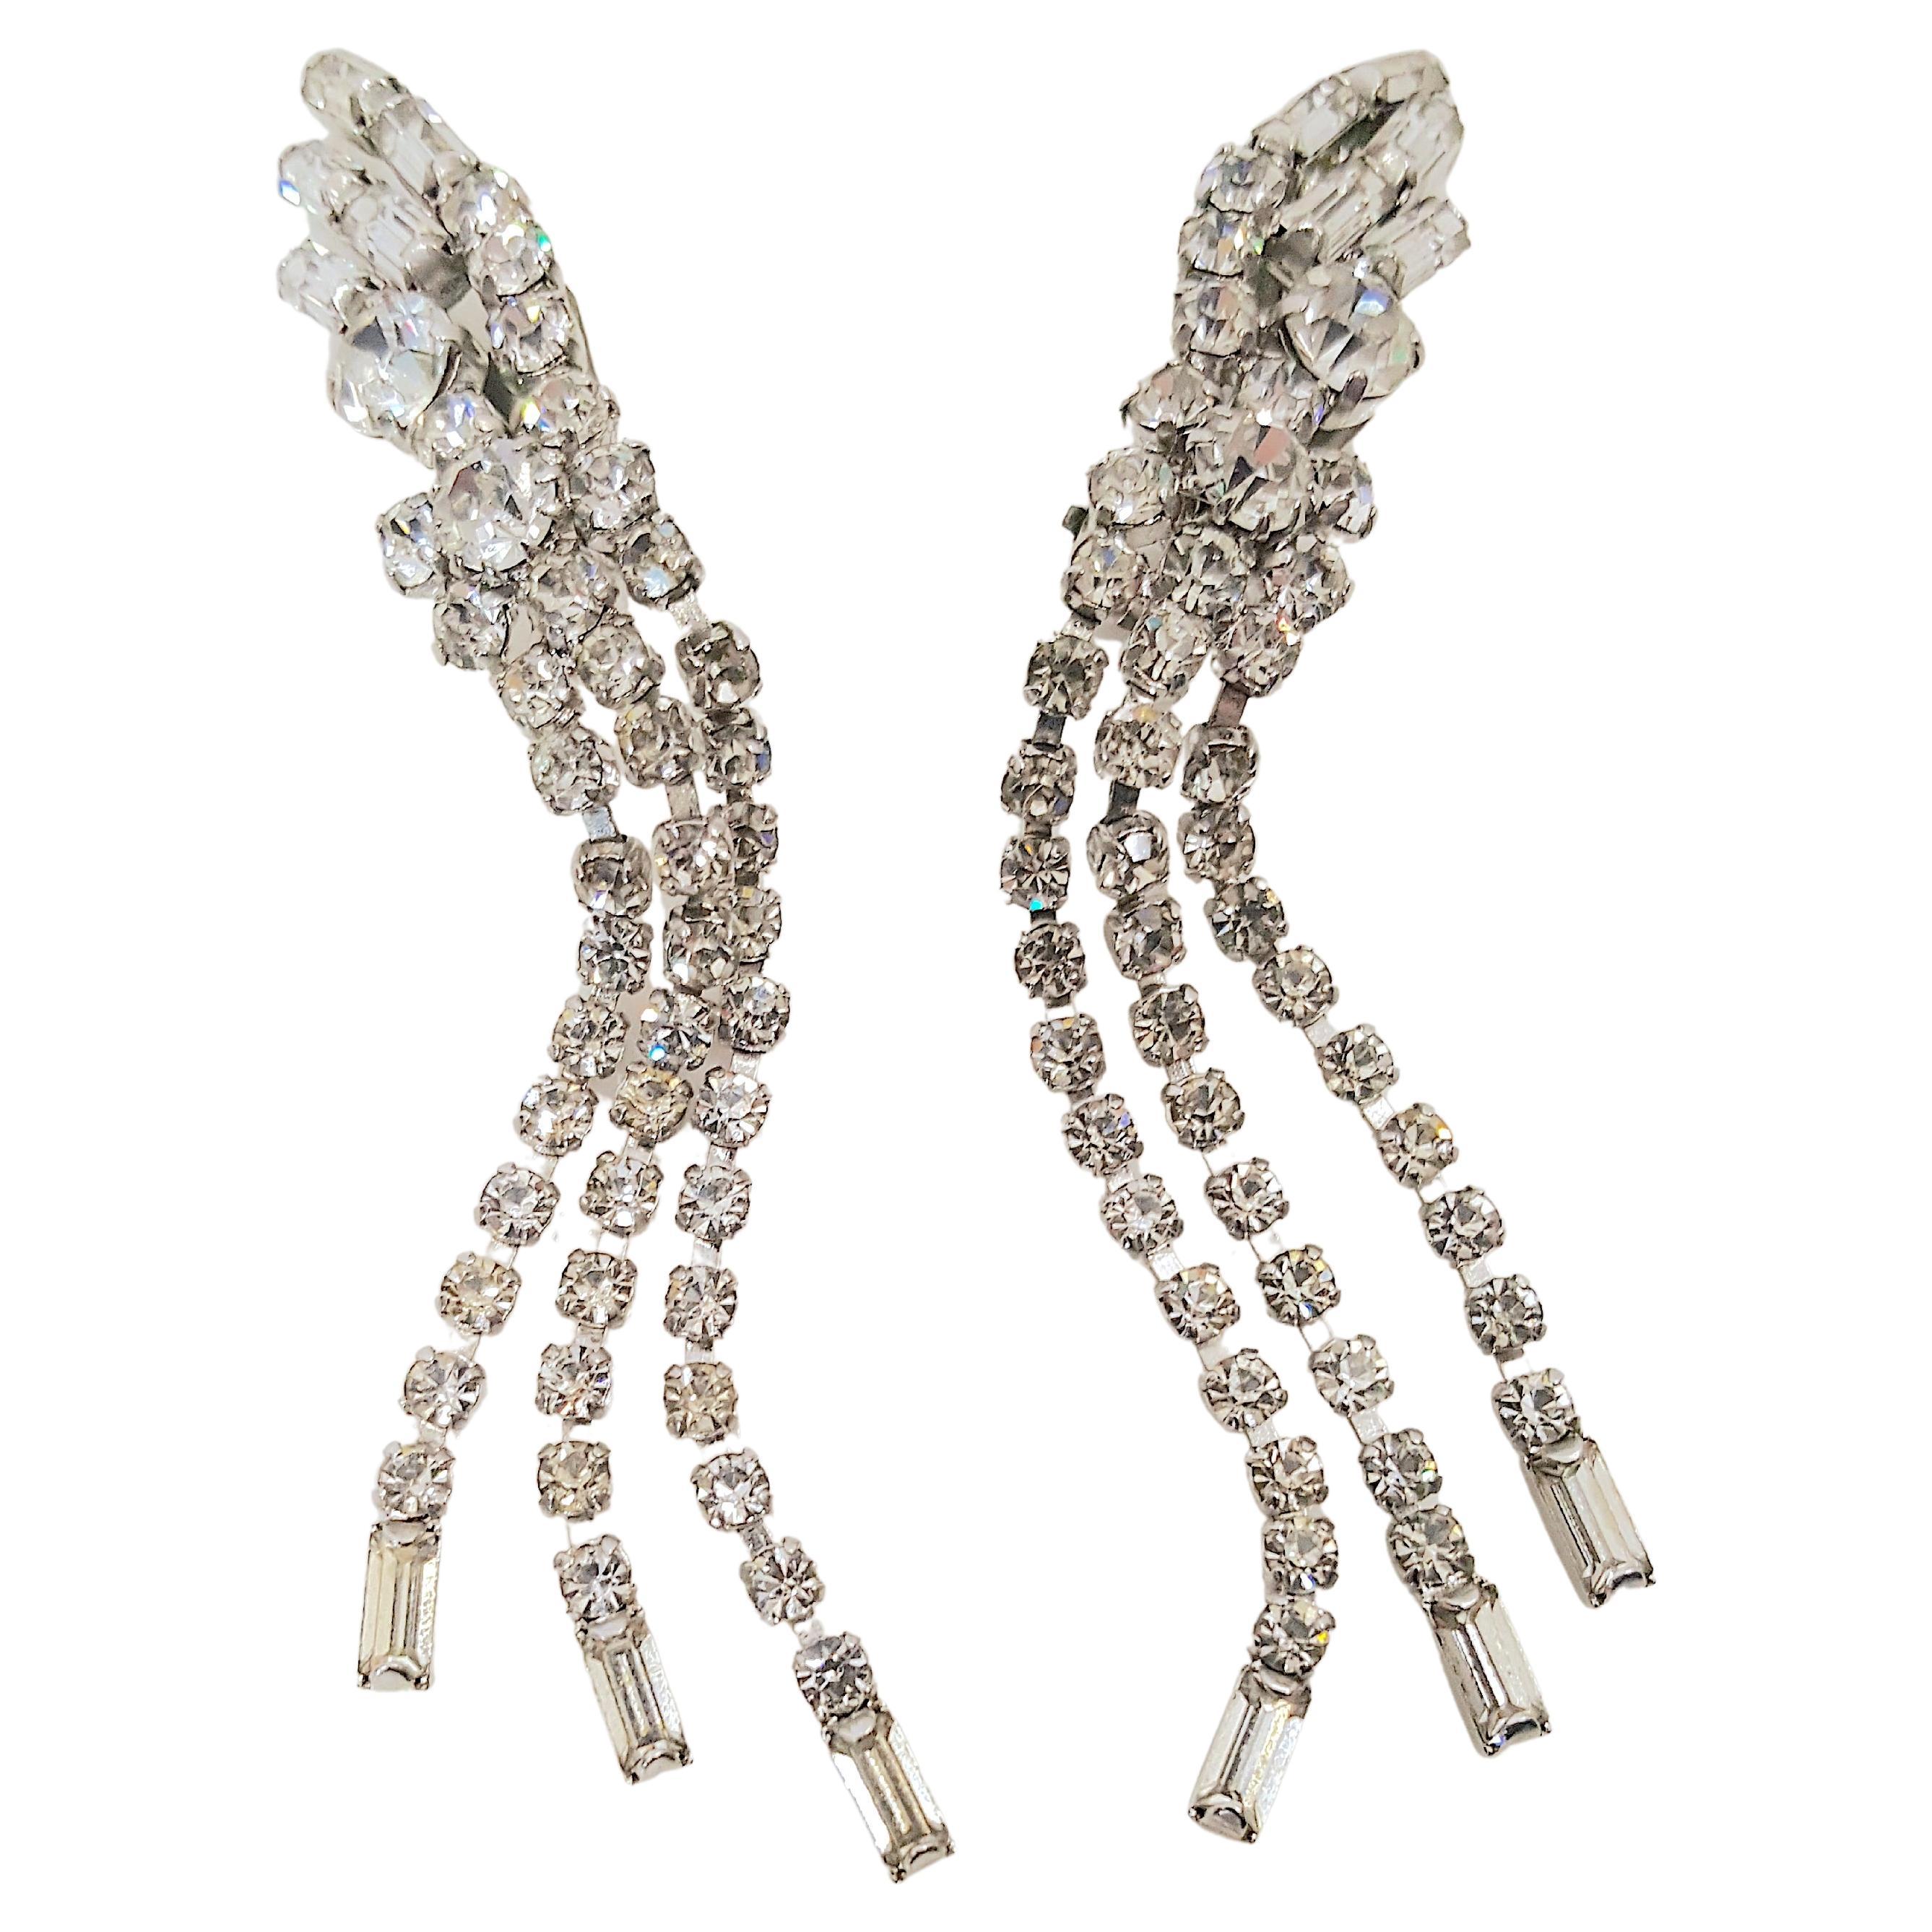 HautCoutureDiorDesignerWesternGermanyMaxMuller Crystal SinuousDangleClipEarrings For Sale